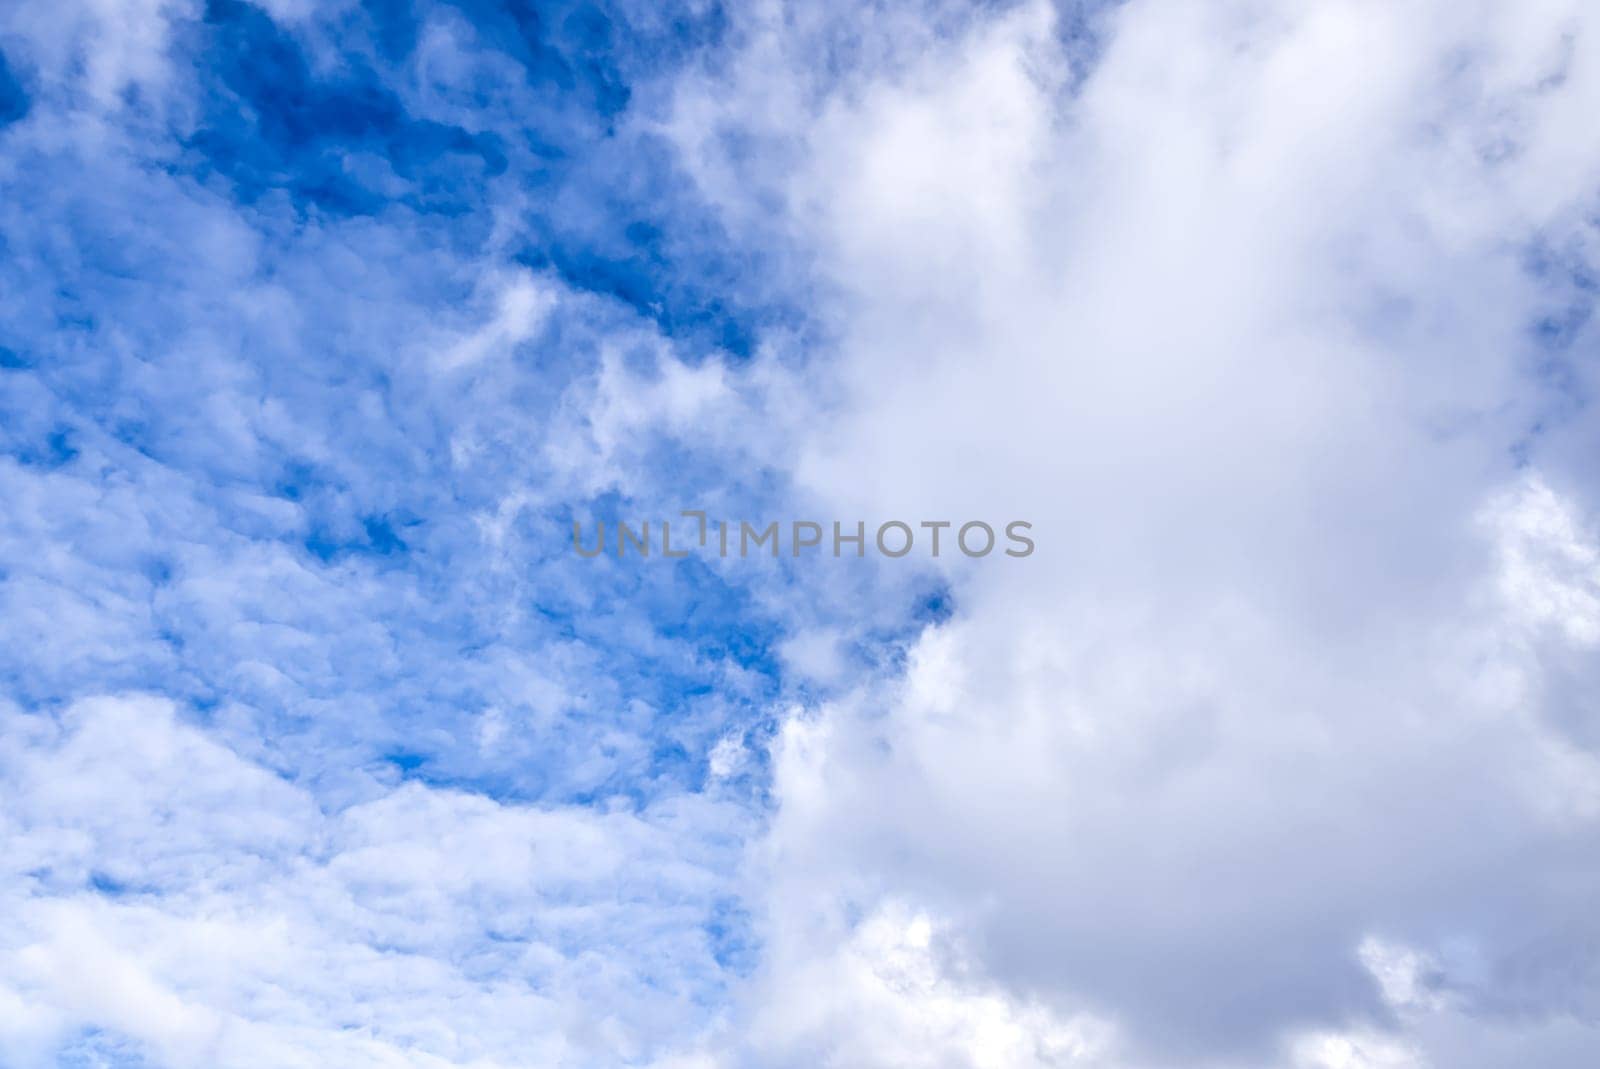 Beautiful Blue Sky And Bright Wite Clouds. perfect background sky image. Summer sky